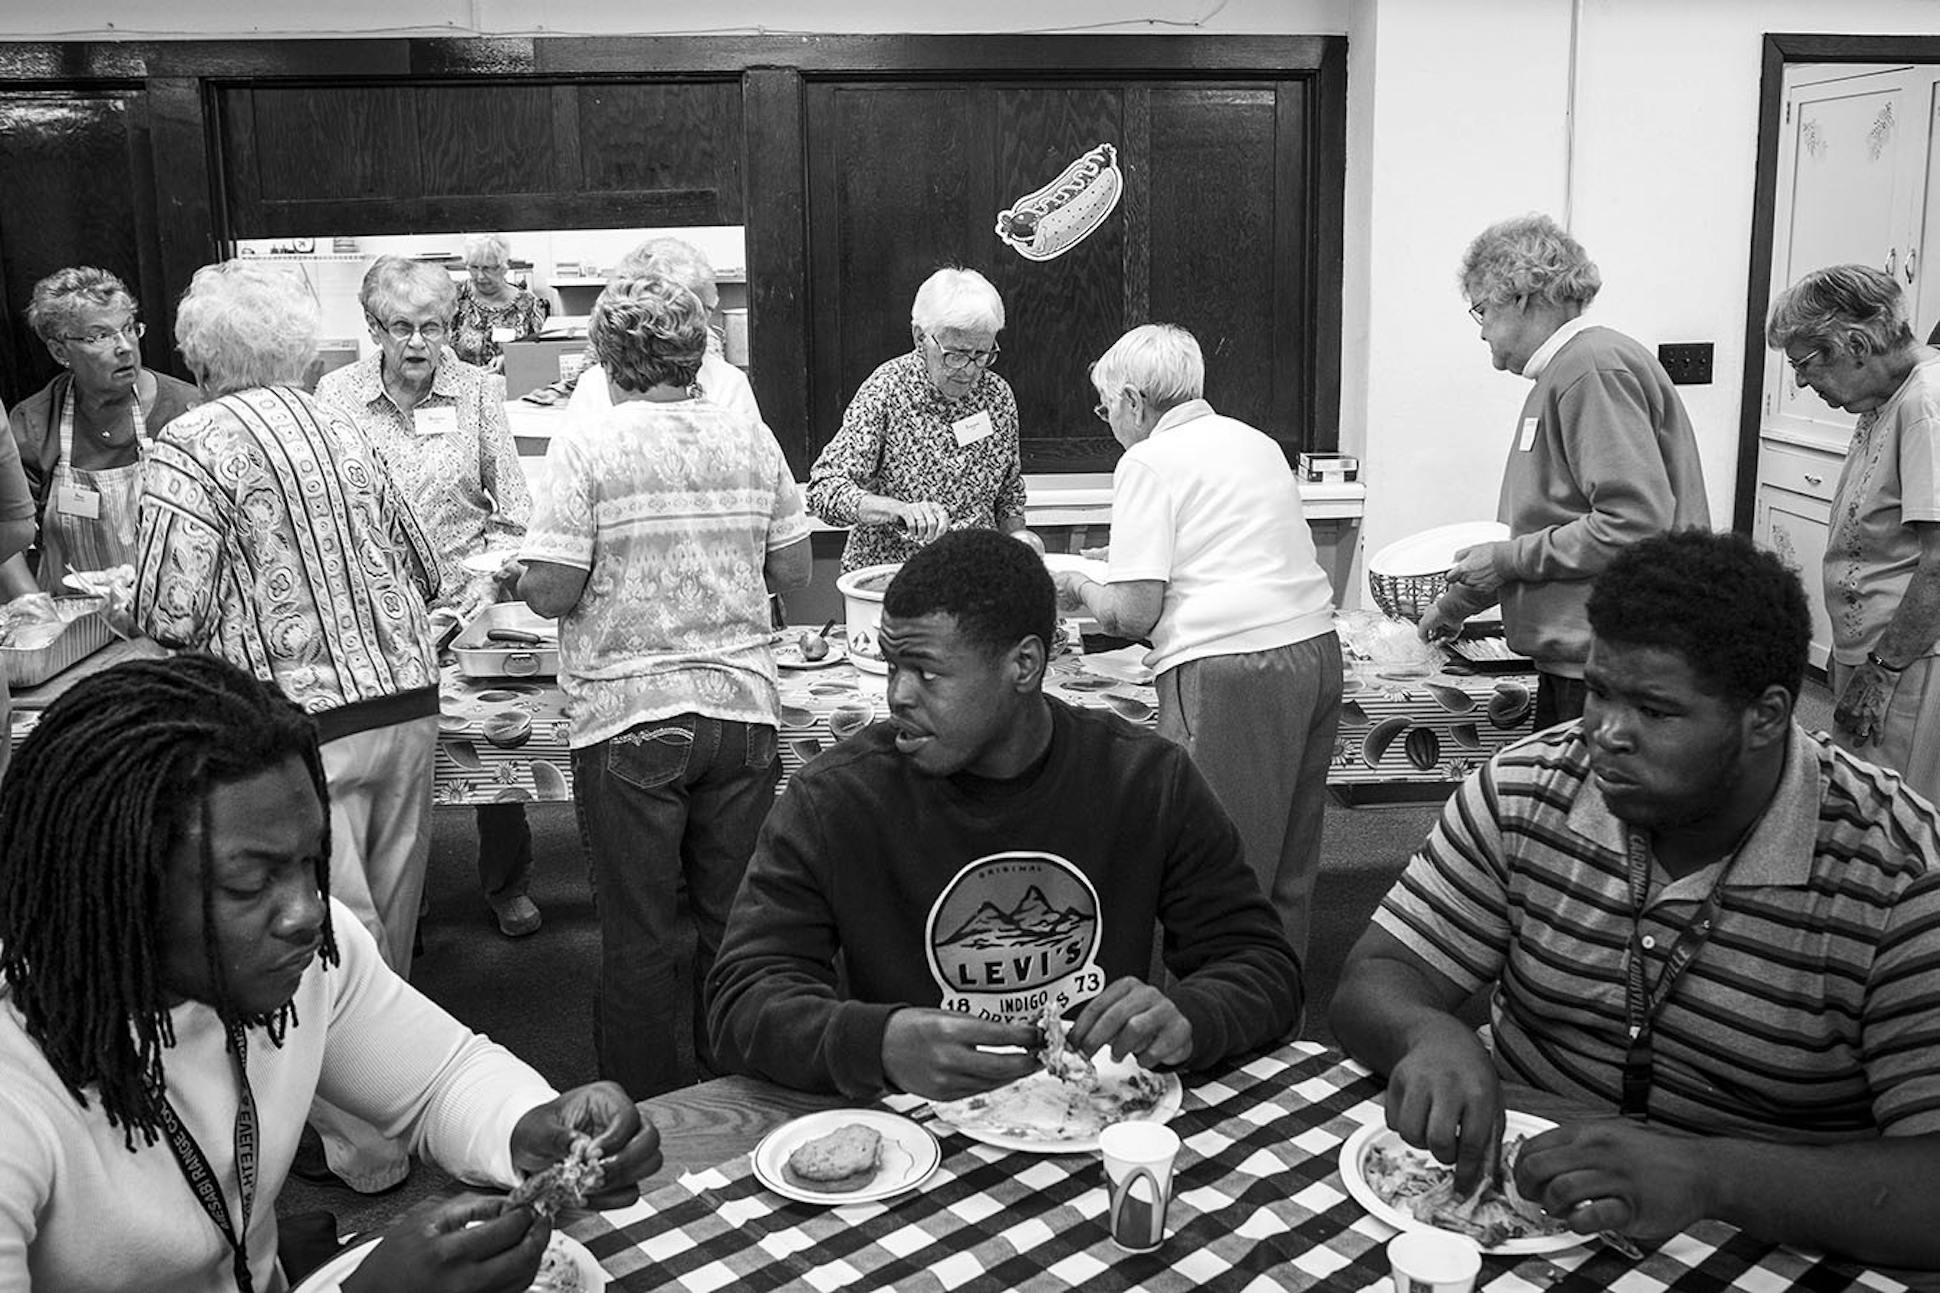 From left, linebacker Elvin Turner, receiver Shaheem Sanders and lineman Uriah English ate lunch in the basement of Hope Community Presbyterian Church in late August as church volunteers served themselves after feeding the team.